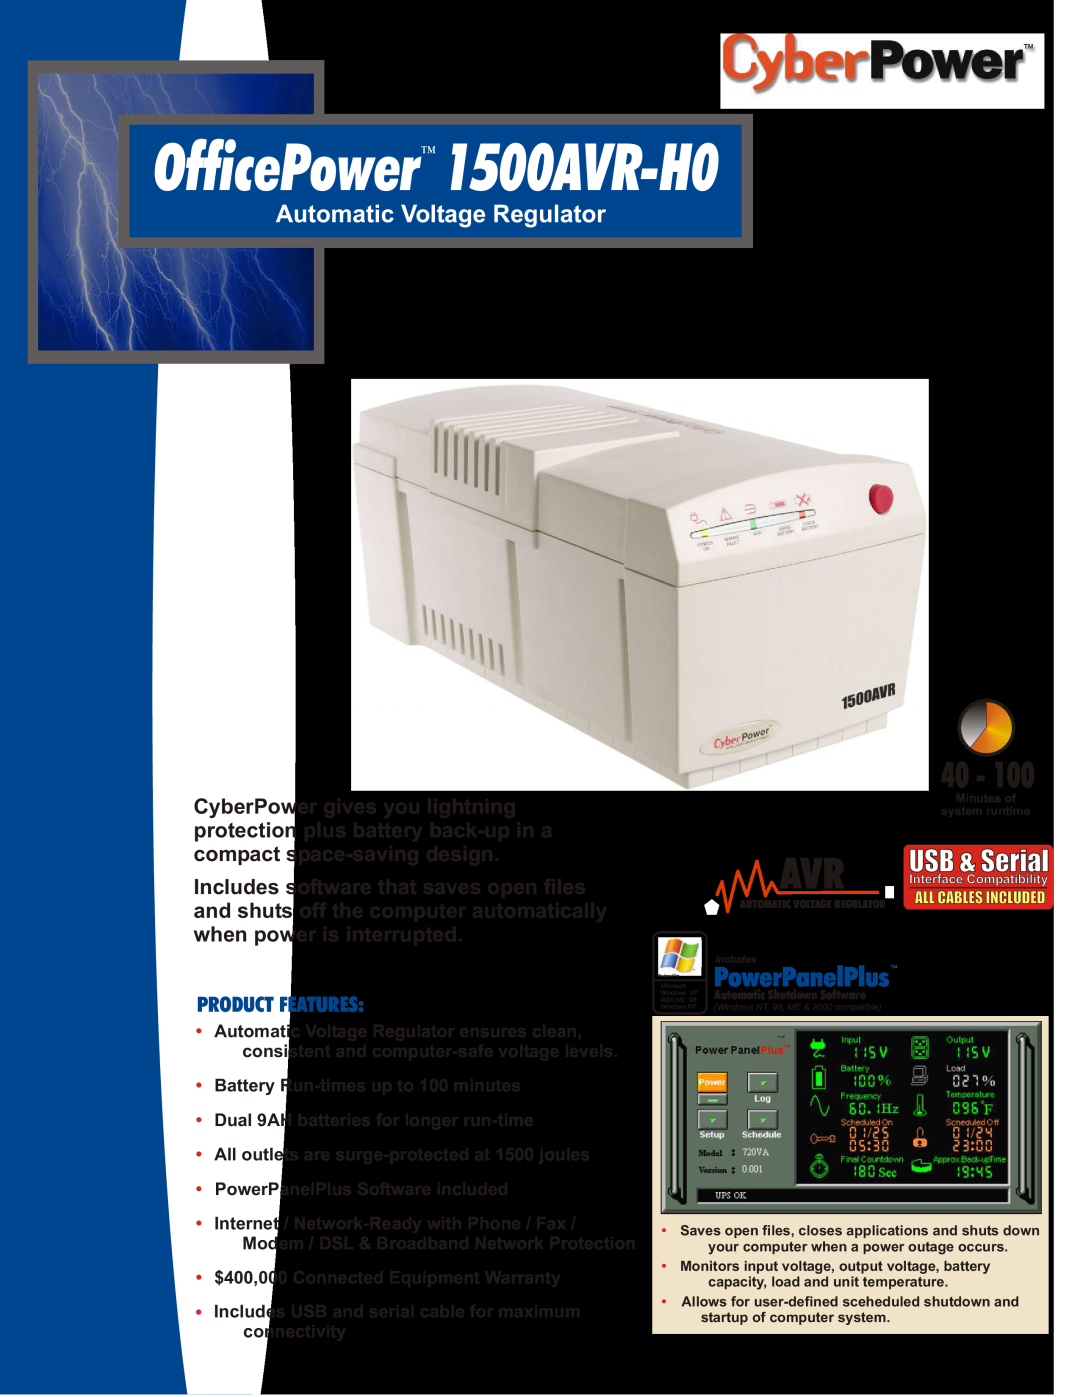 CyberPower Systems warranty OfficePower 1500AVR-H0, PowerPanelPlus, Automatic Voltage Regulator, Product Features 